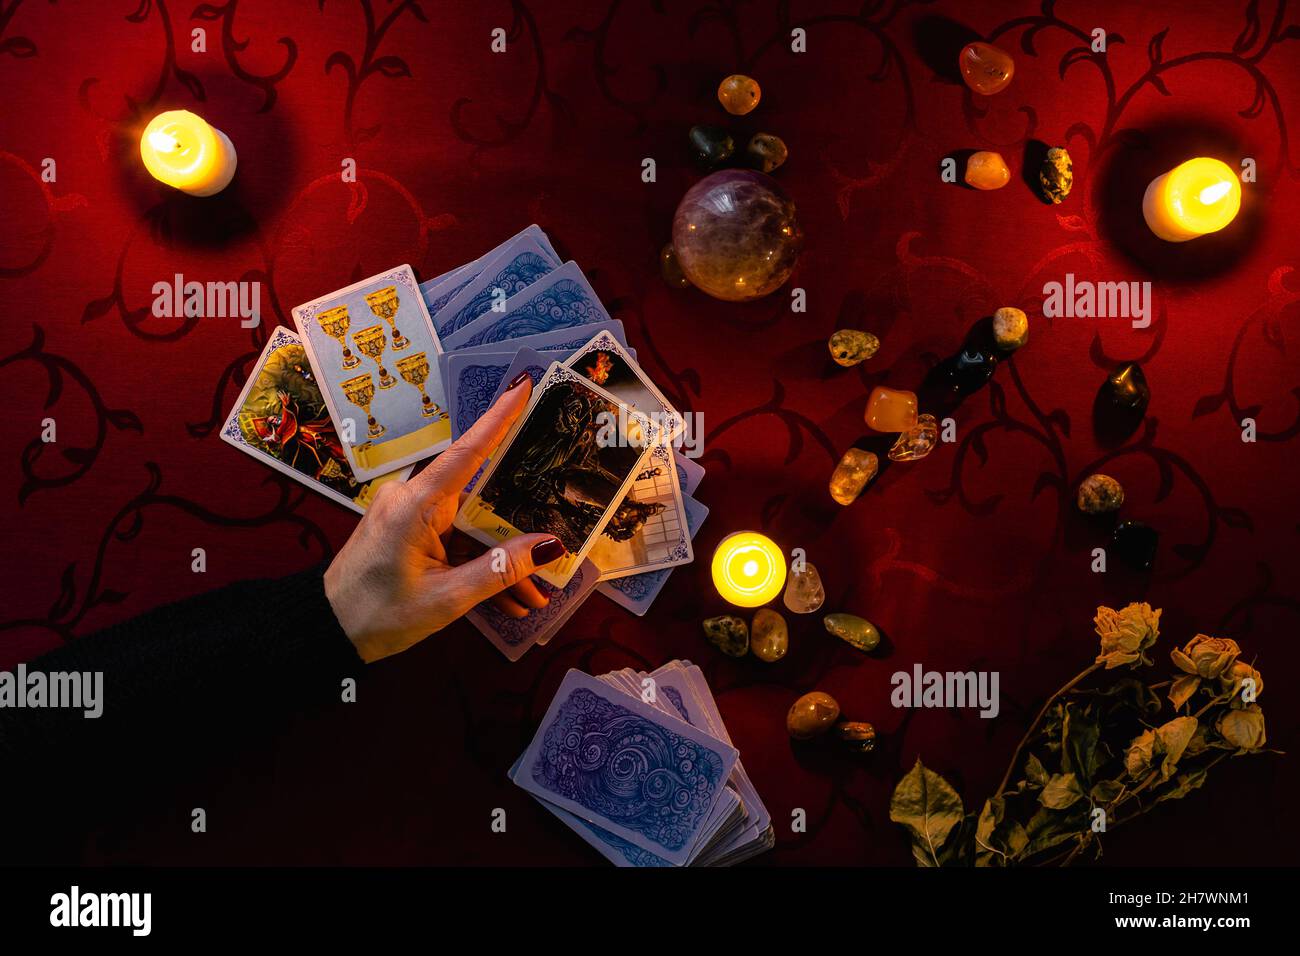 Minsk, Belarus - November 2021: the fortuneteller holds the Death tarot card in his hand. Photo of the layout on the Tarot cards. Stock Photo